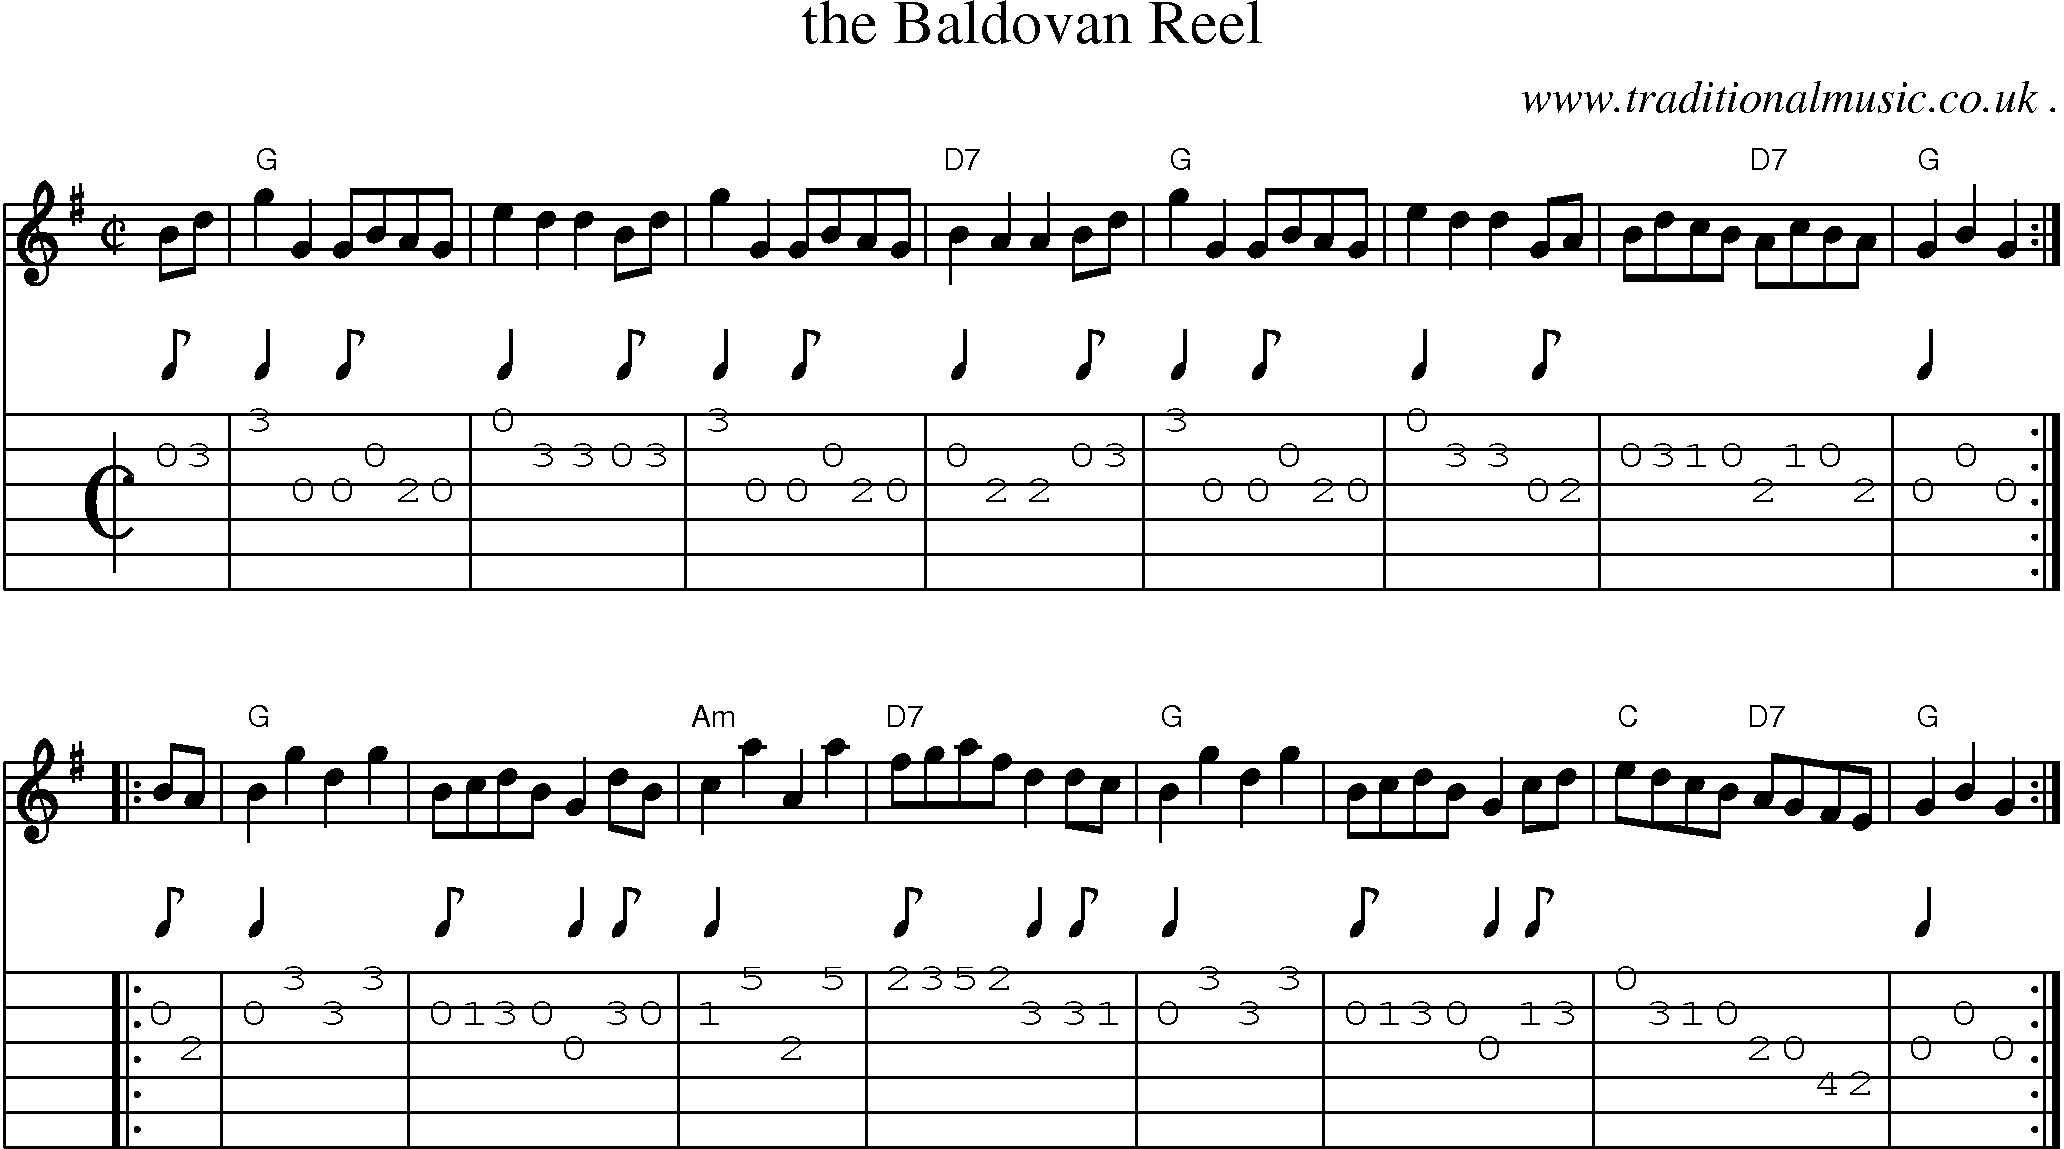 Sheet-music  score, Chords and Guitar Tabs for The Baldovan Reel